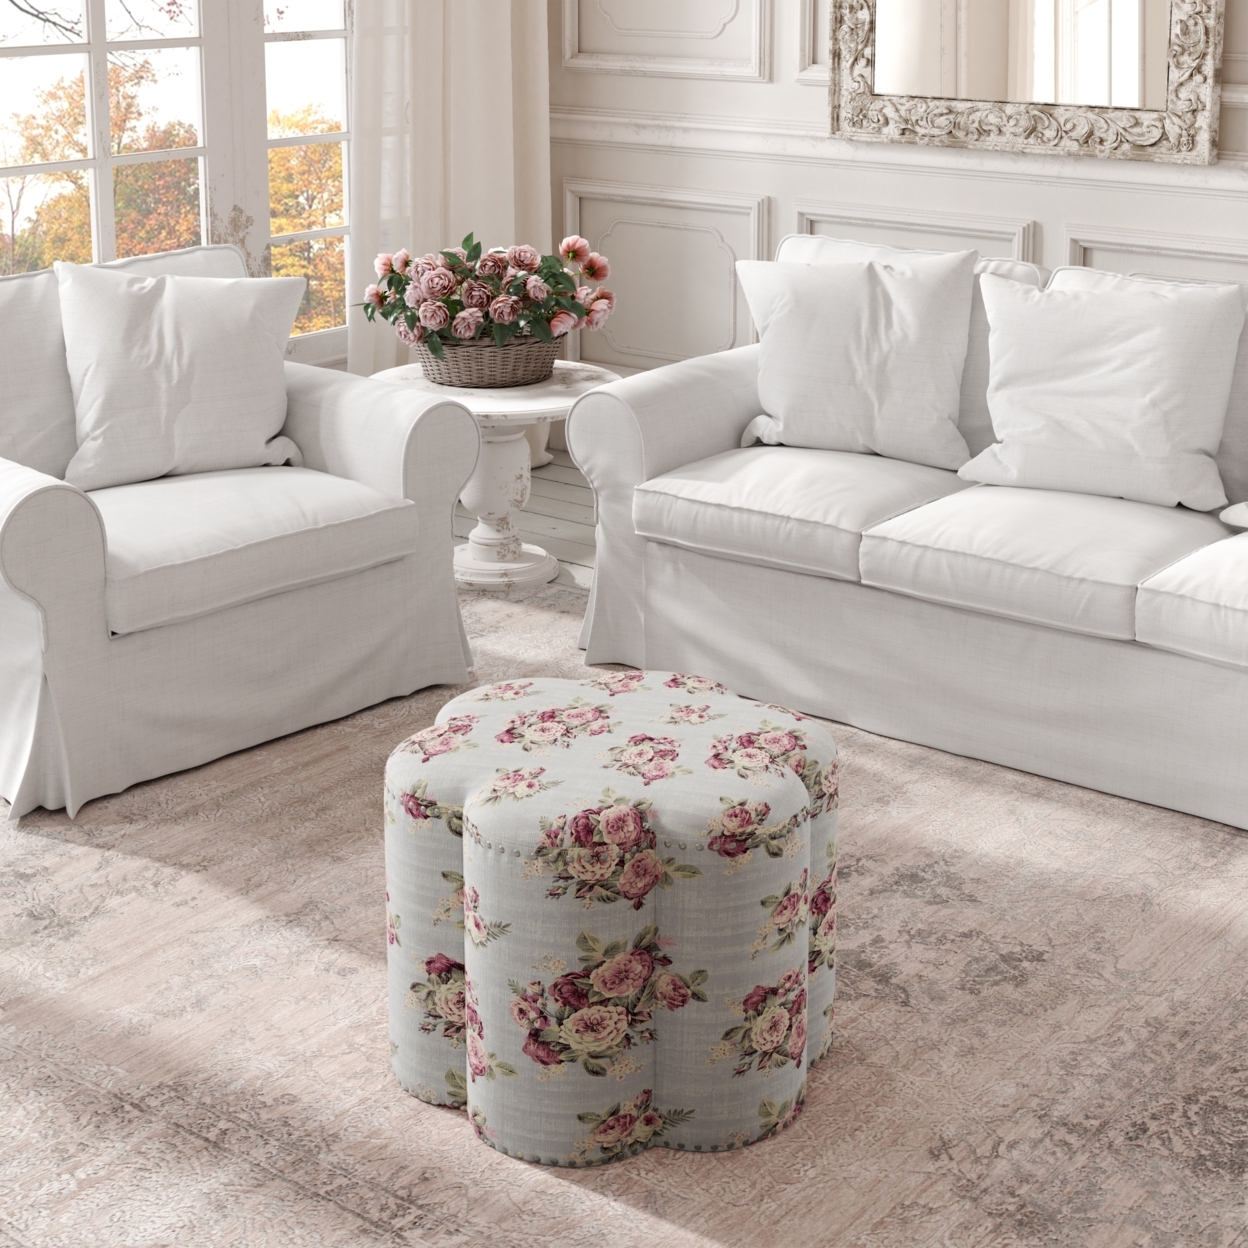 Paizley Ottoman-Upholstered-Nailhead Trim-Solid Pattern - Manor Floral